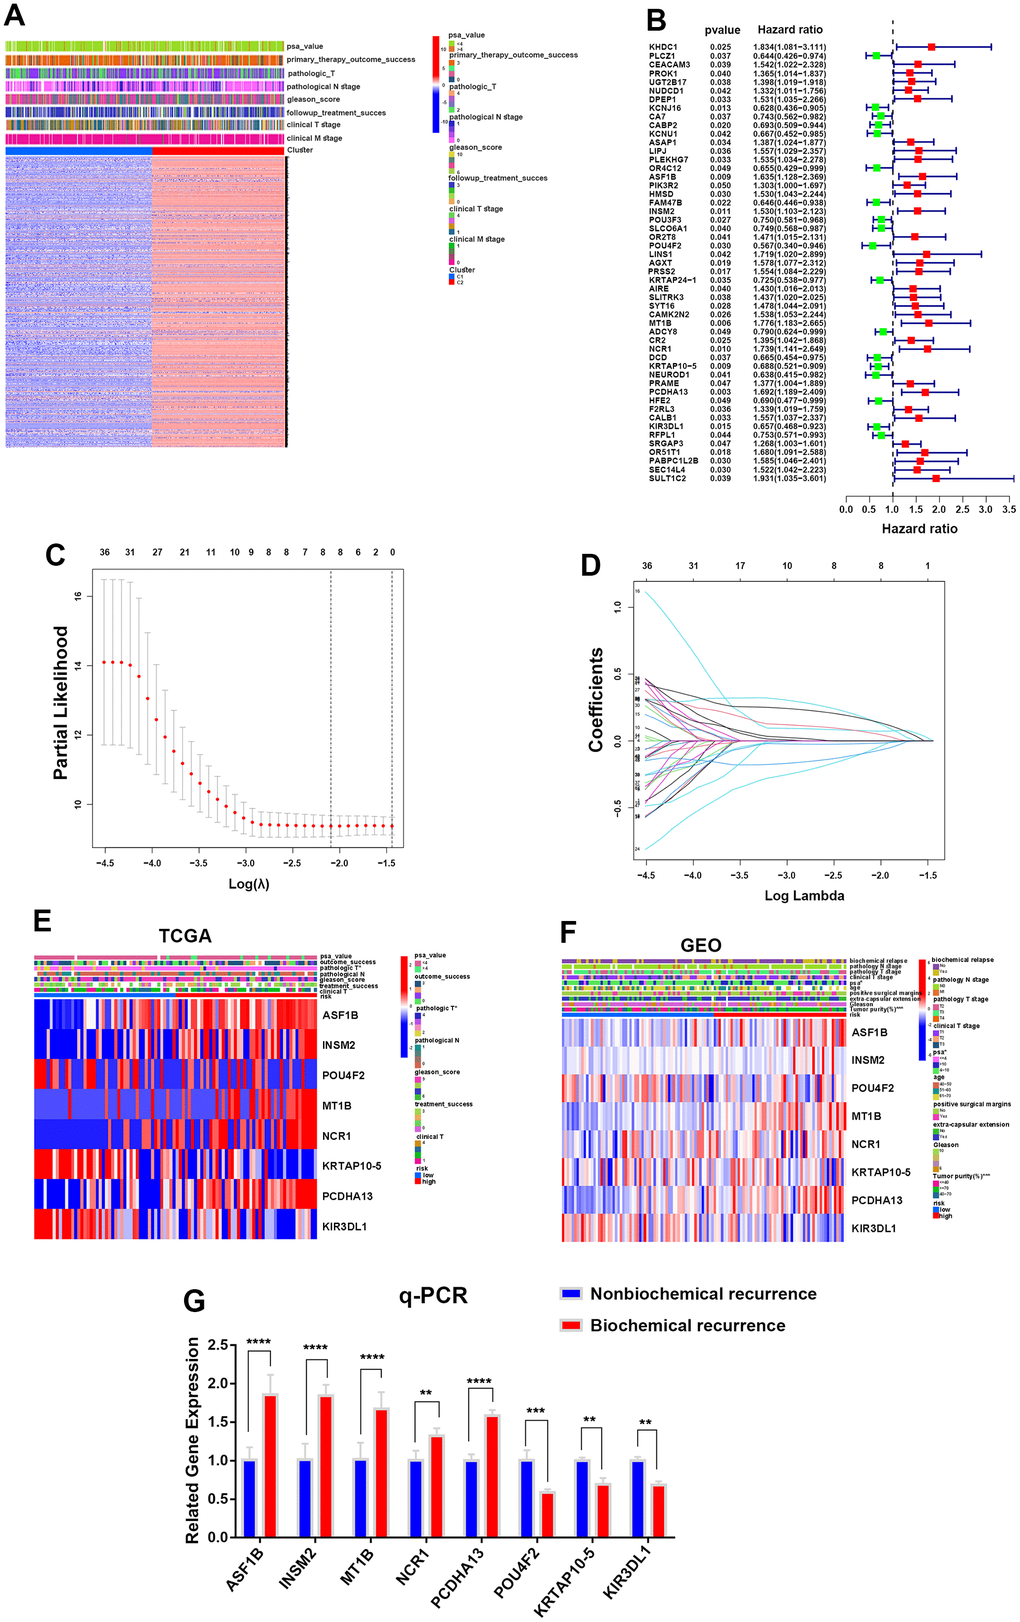 Construction of a prognostic risk model for PCa according to integrin αvβ3/α6β1. (A) Heatmap of differentially expressed genes (DEGs) and clinical characteristics for two clusters in the TCGA cohort. (B) Forest plot of 51 DEGs interfering with the biochemical recurrence of PCa in the TCGA cohort. (C) LASSO Cox regression analysis for eight biochemical recurrence-related genes in both the TCGA and GEO cohorts. (D) LASSO Cox regression of cross-validation between the TCGA and GEO cohorts. (E, F) Heatmaps of the expression of 8 biochemical recurrence-related genes in the TCGA and GEO cohorts. (G) qPCR was used to verify the gene expression levels of the constructed model in biochemically recurrent and nonbiochemically recurrent PCa.